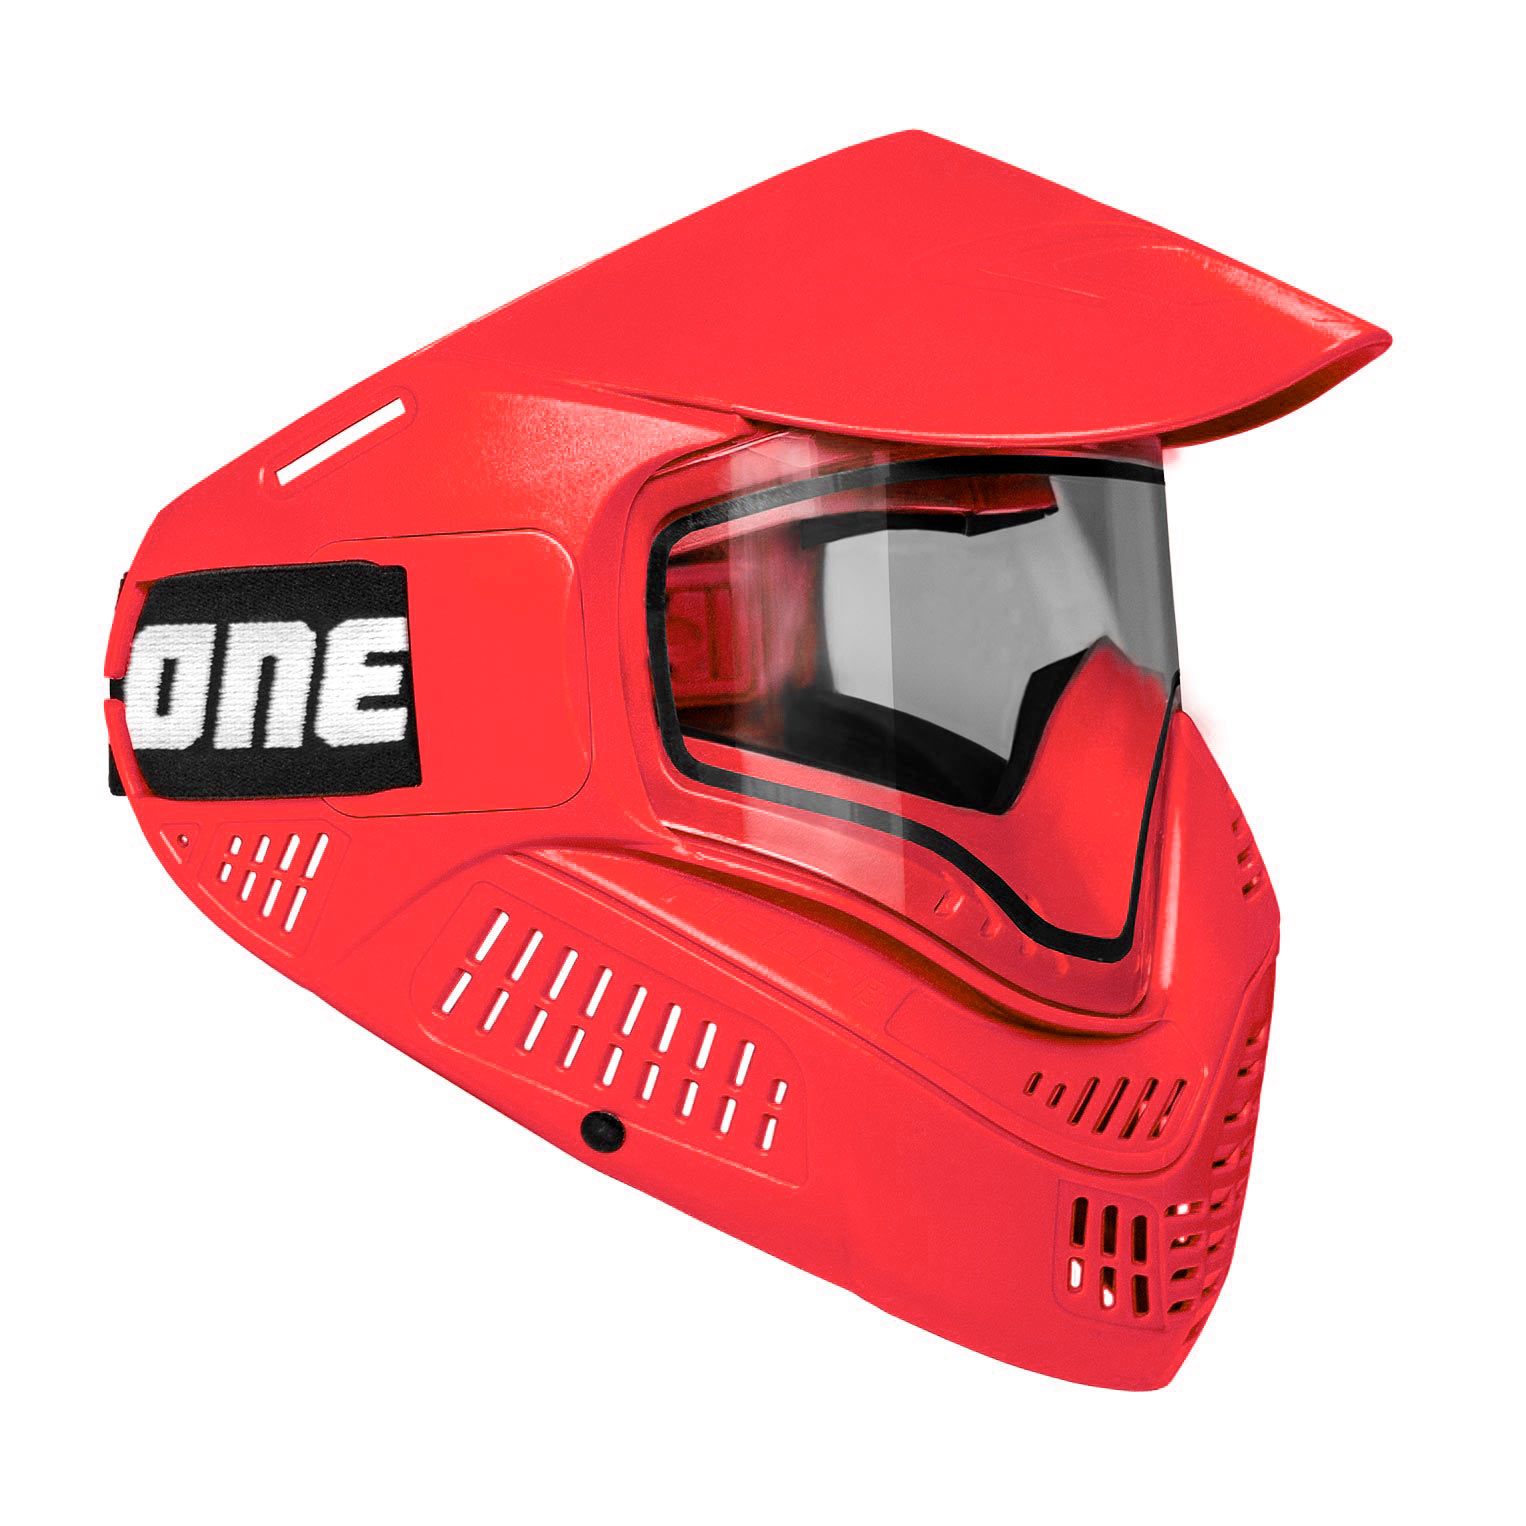 FIELDpb ONE Goggle Red (Thermal Lens) Rubber Foam